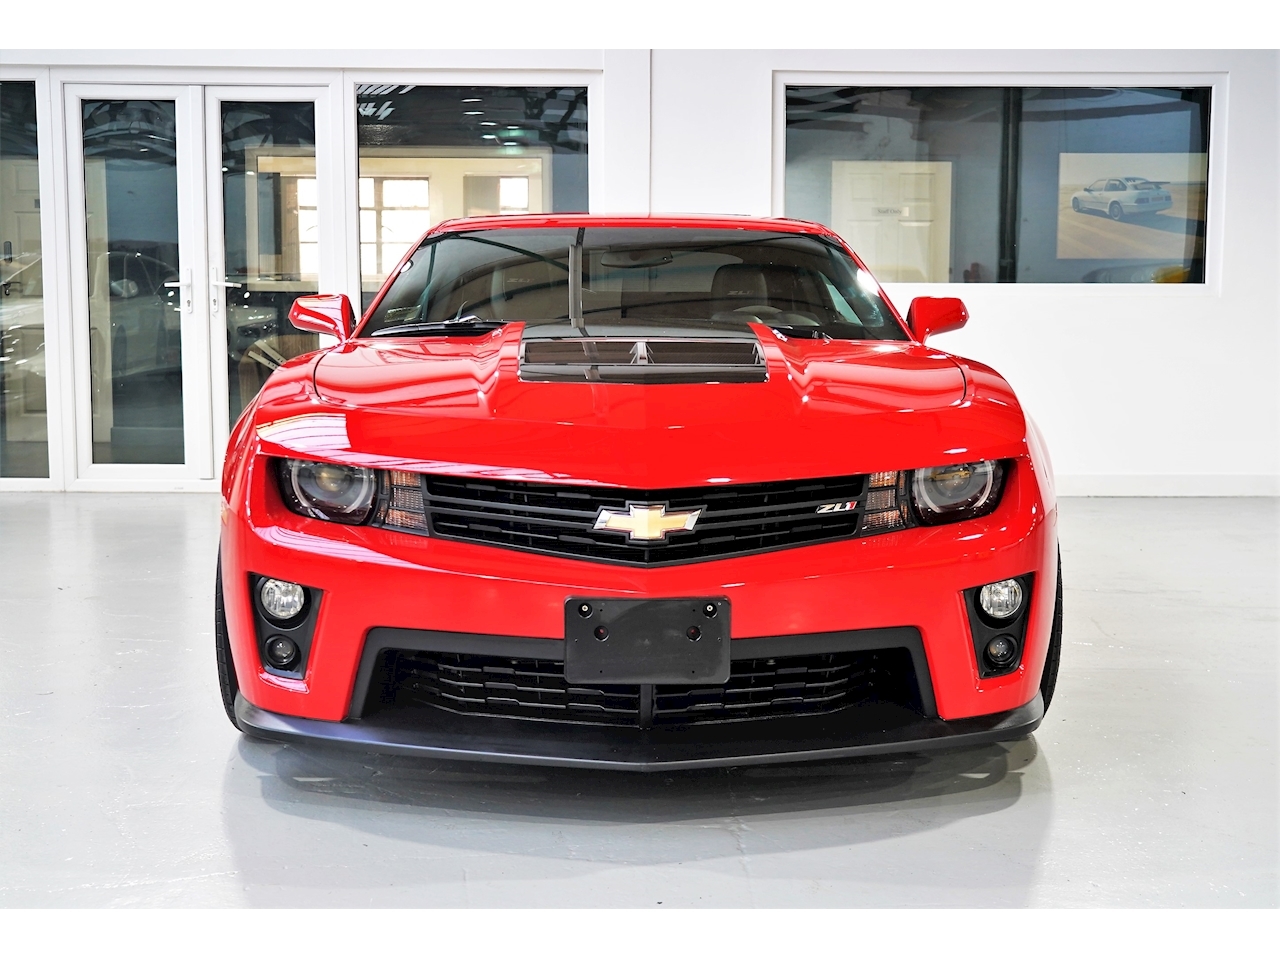 2015 Chevrolet Camaro ZL1 - Factory Supercharged LSA - Facelift - Left Hand Drive